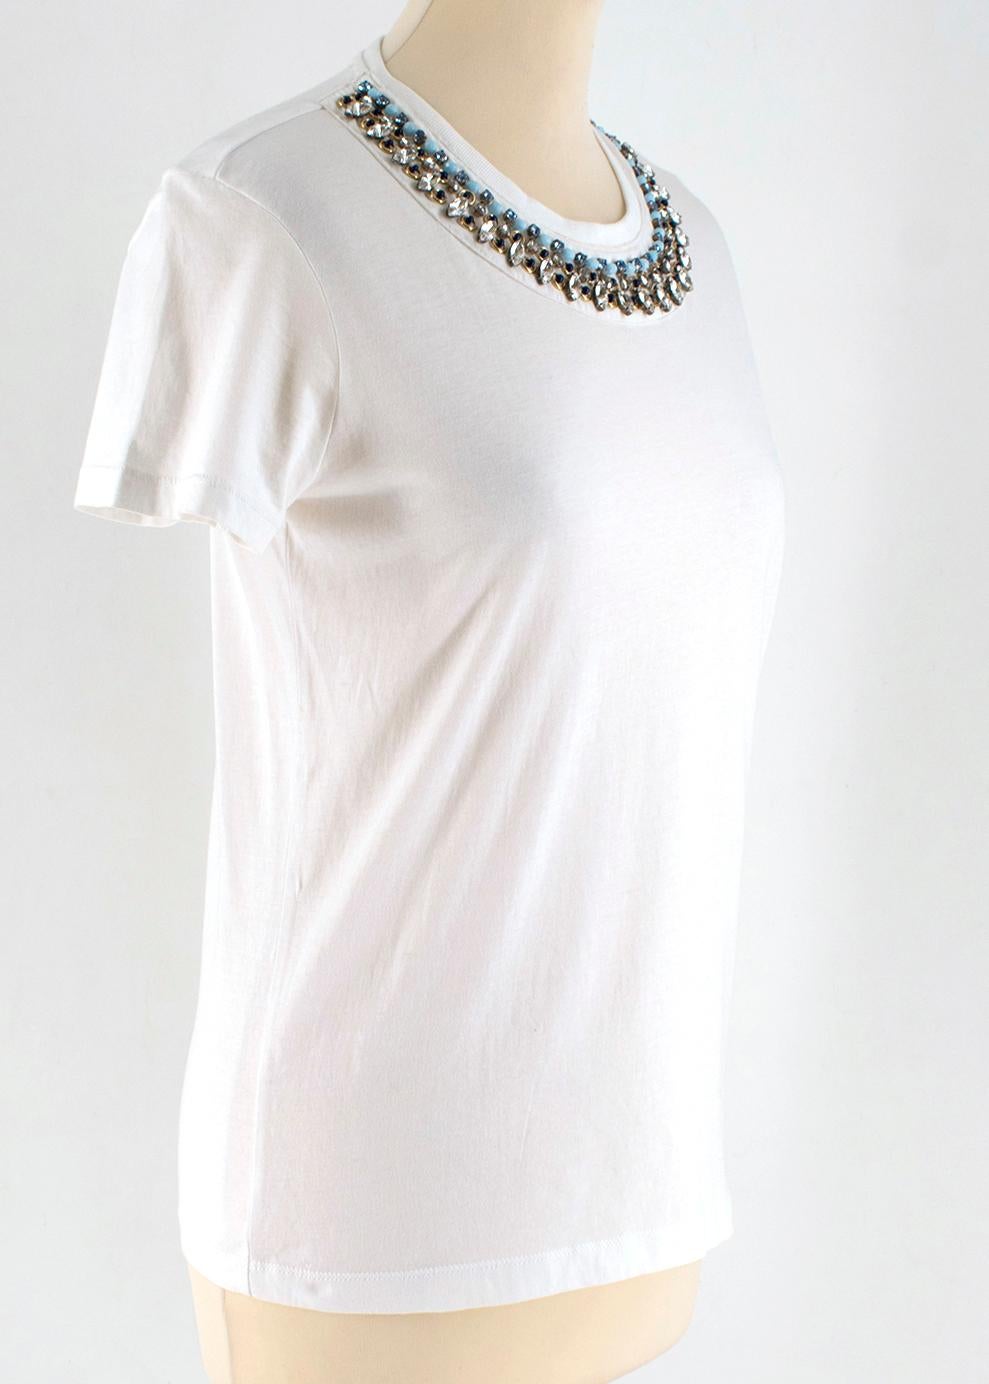 Prada White Cotton Embellished T-shirt

- white cotton t shirt 
- crystal and bead embellished to the collar
- round neckline 

This seller usually wears XS-  S size

Approx:
Measurements are taken with the item lying flat, seam to seam.
Shoulders: